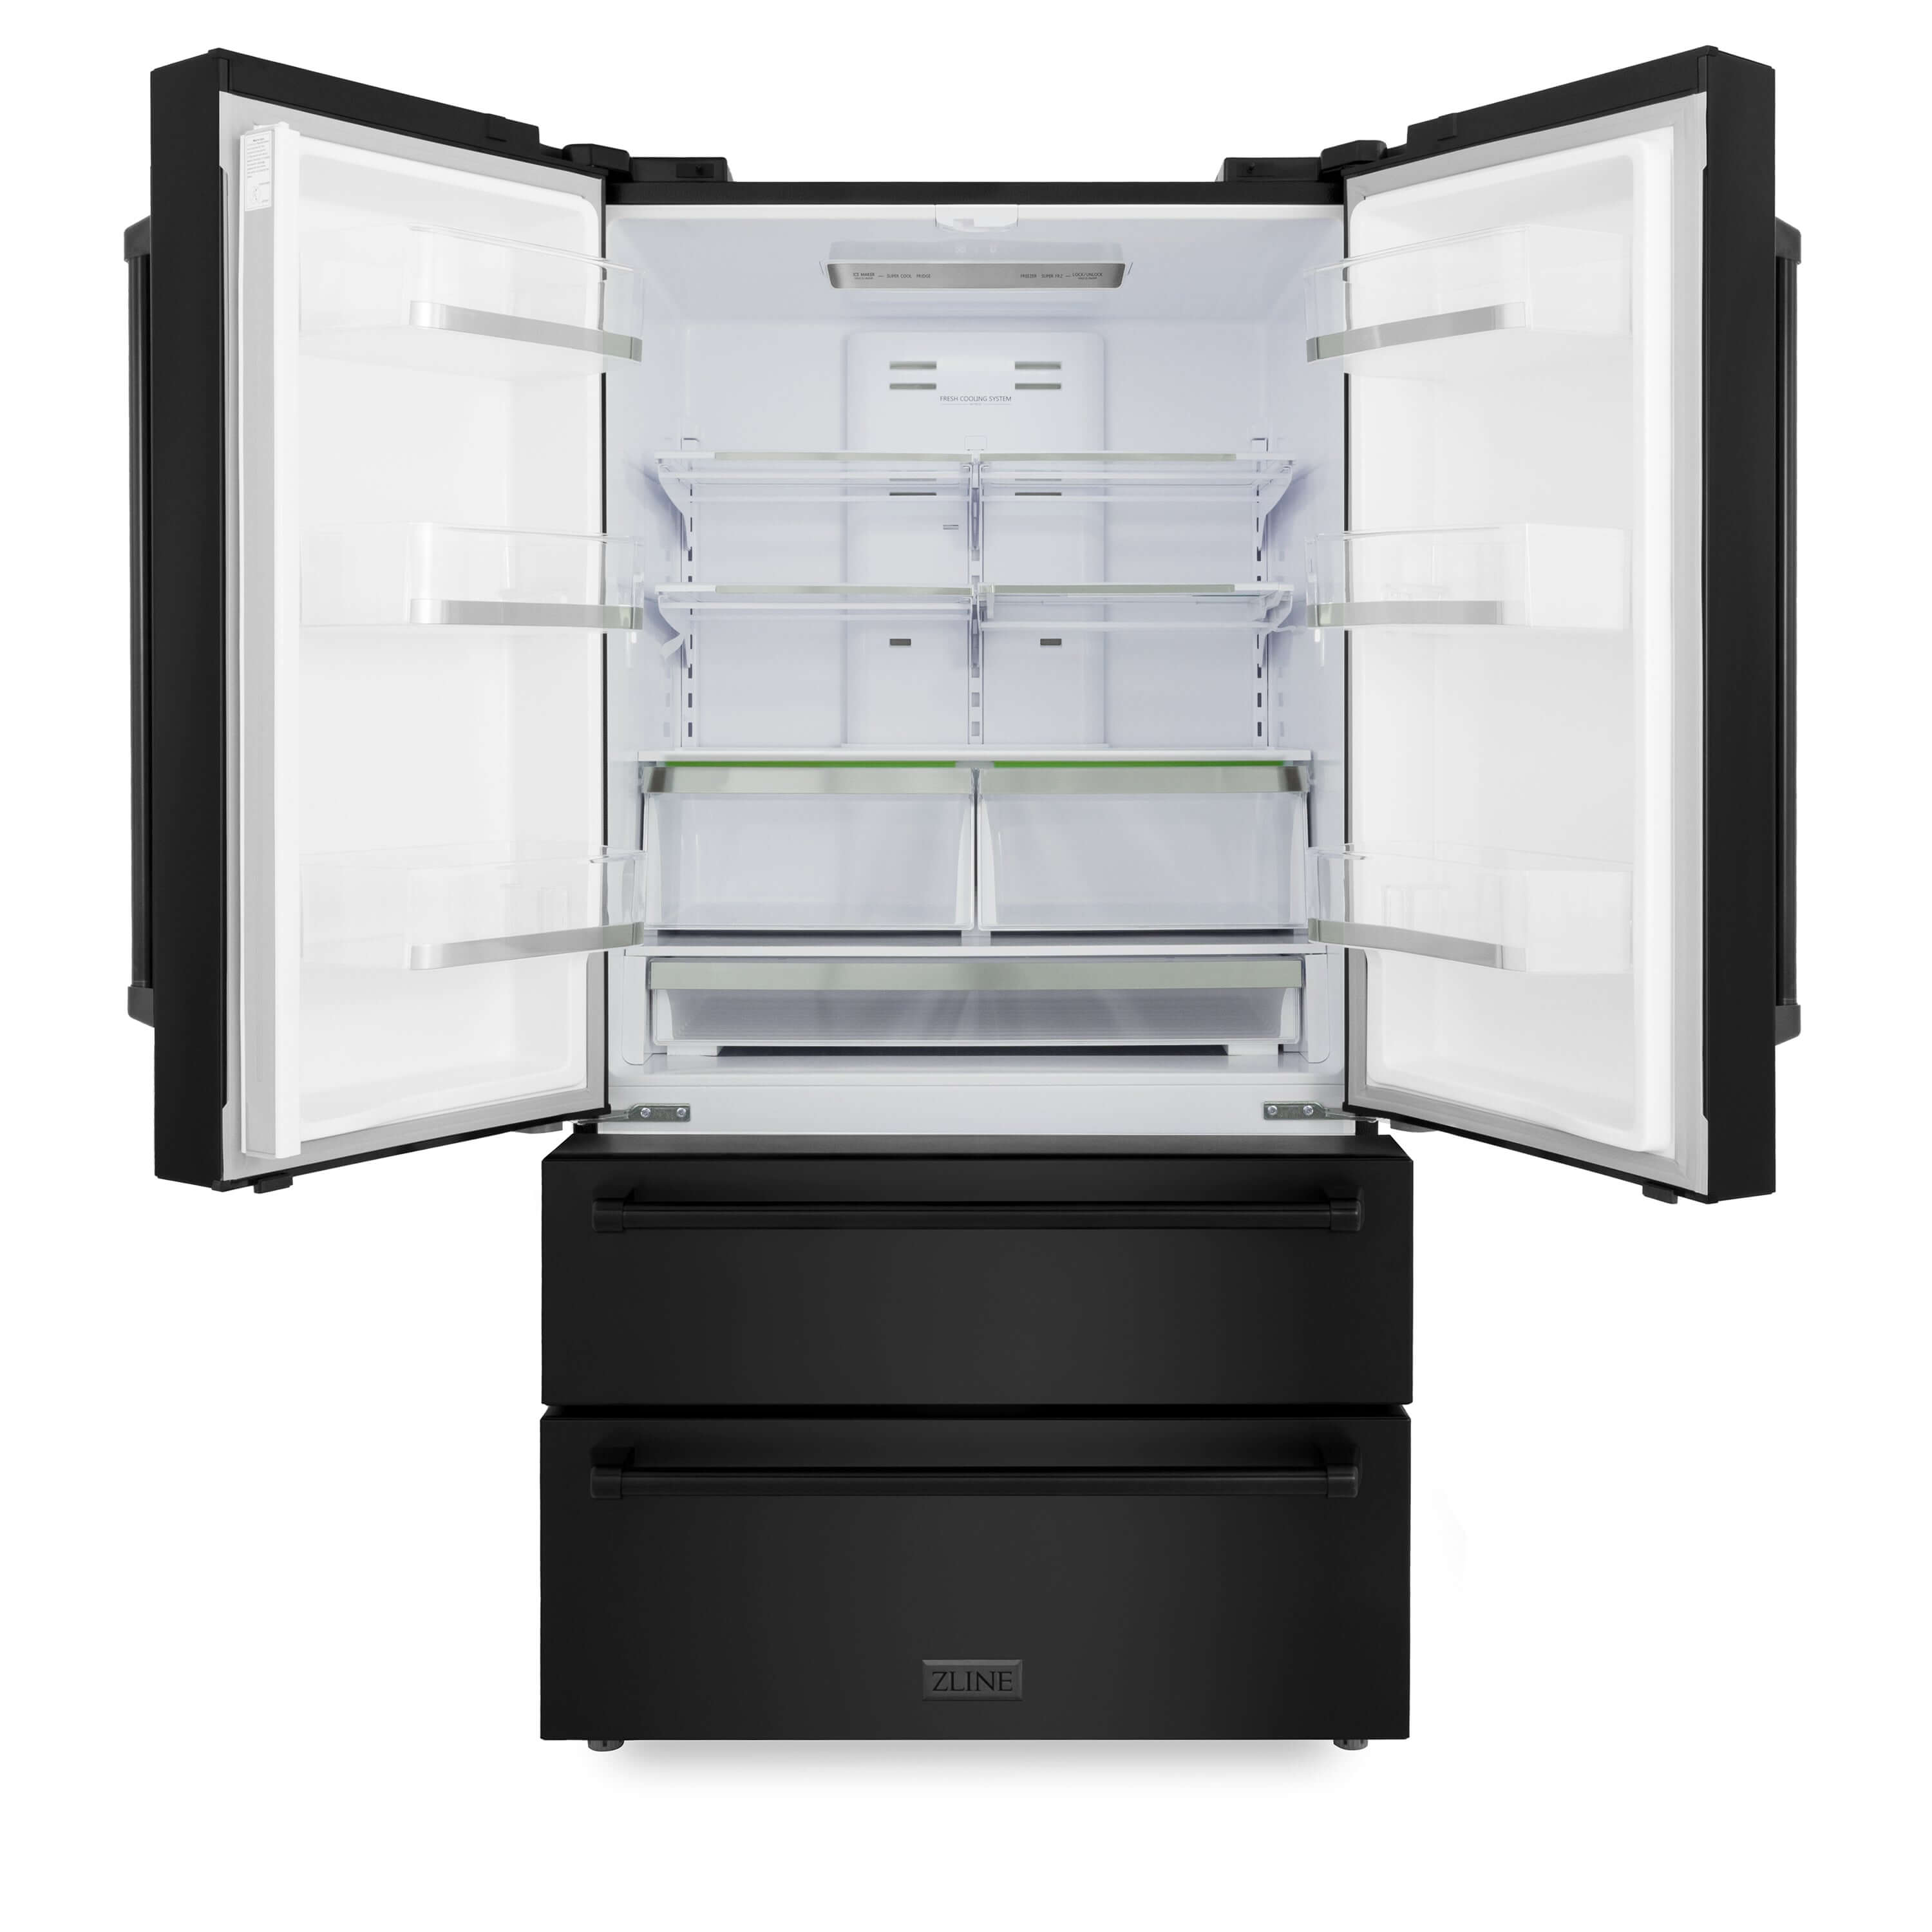 ZLINE Kitchen Package in Black Stainless Steel with 36 in. French Door Refrigerator, 48 in. Gas Rangetop, 48 in. Convertible Vent Range Hood, 30 in. Double Wall Oven, and 24 in. Tall Tub Dishwasher (5KPR-RTBRH48-AWDDWV)